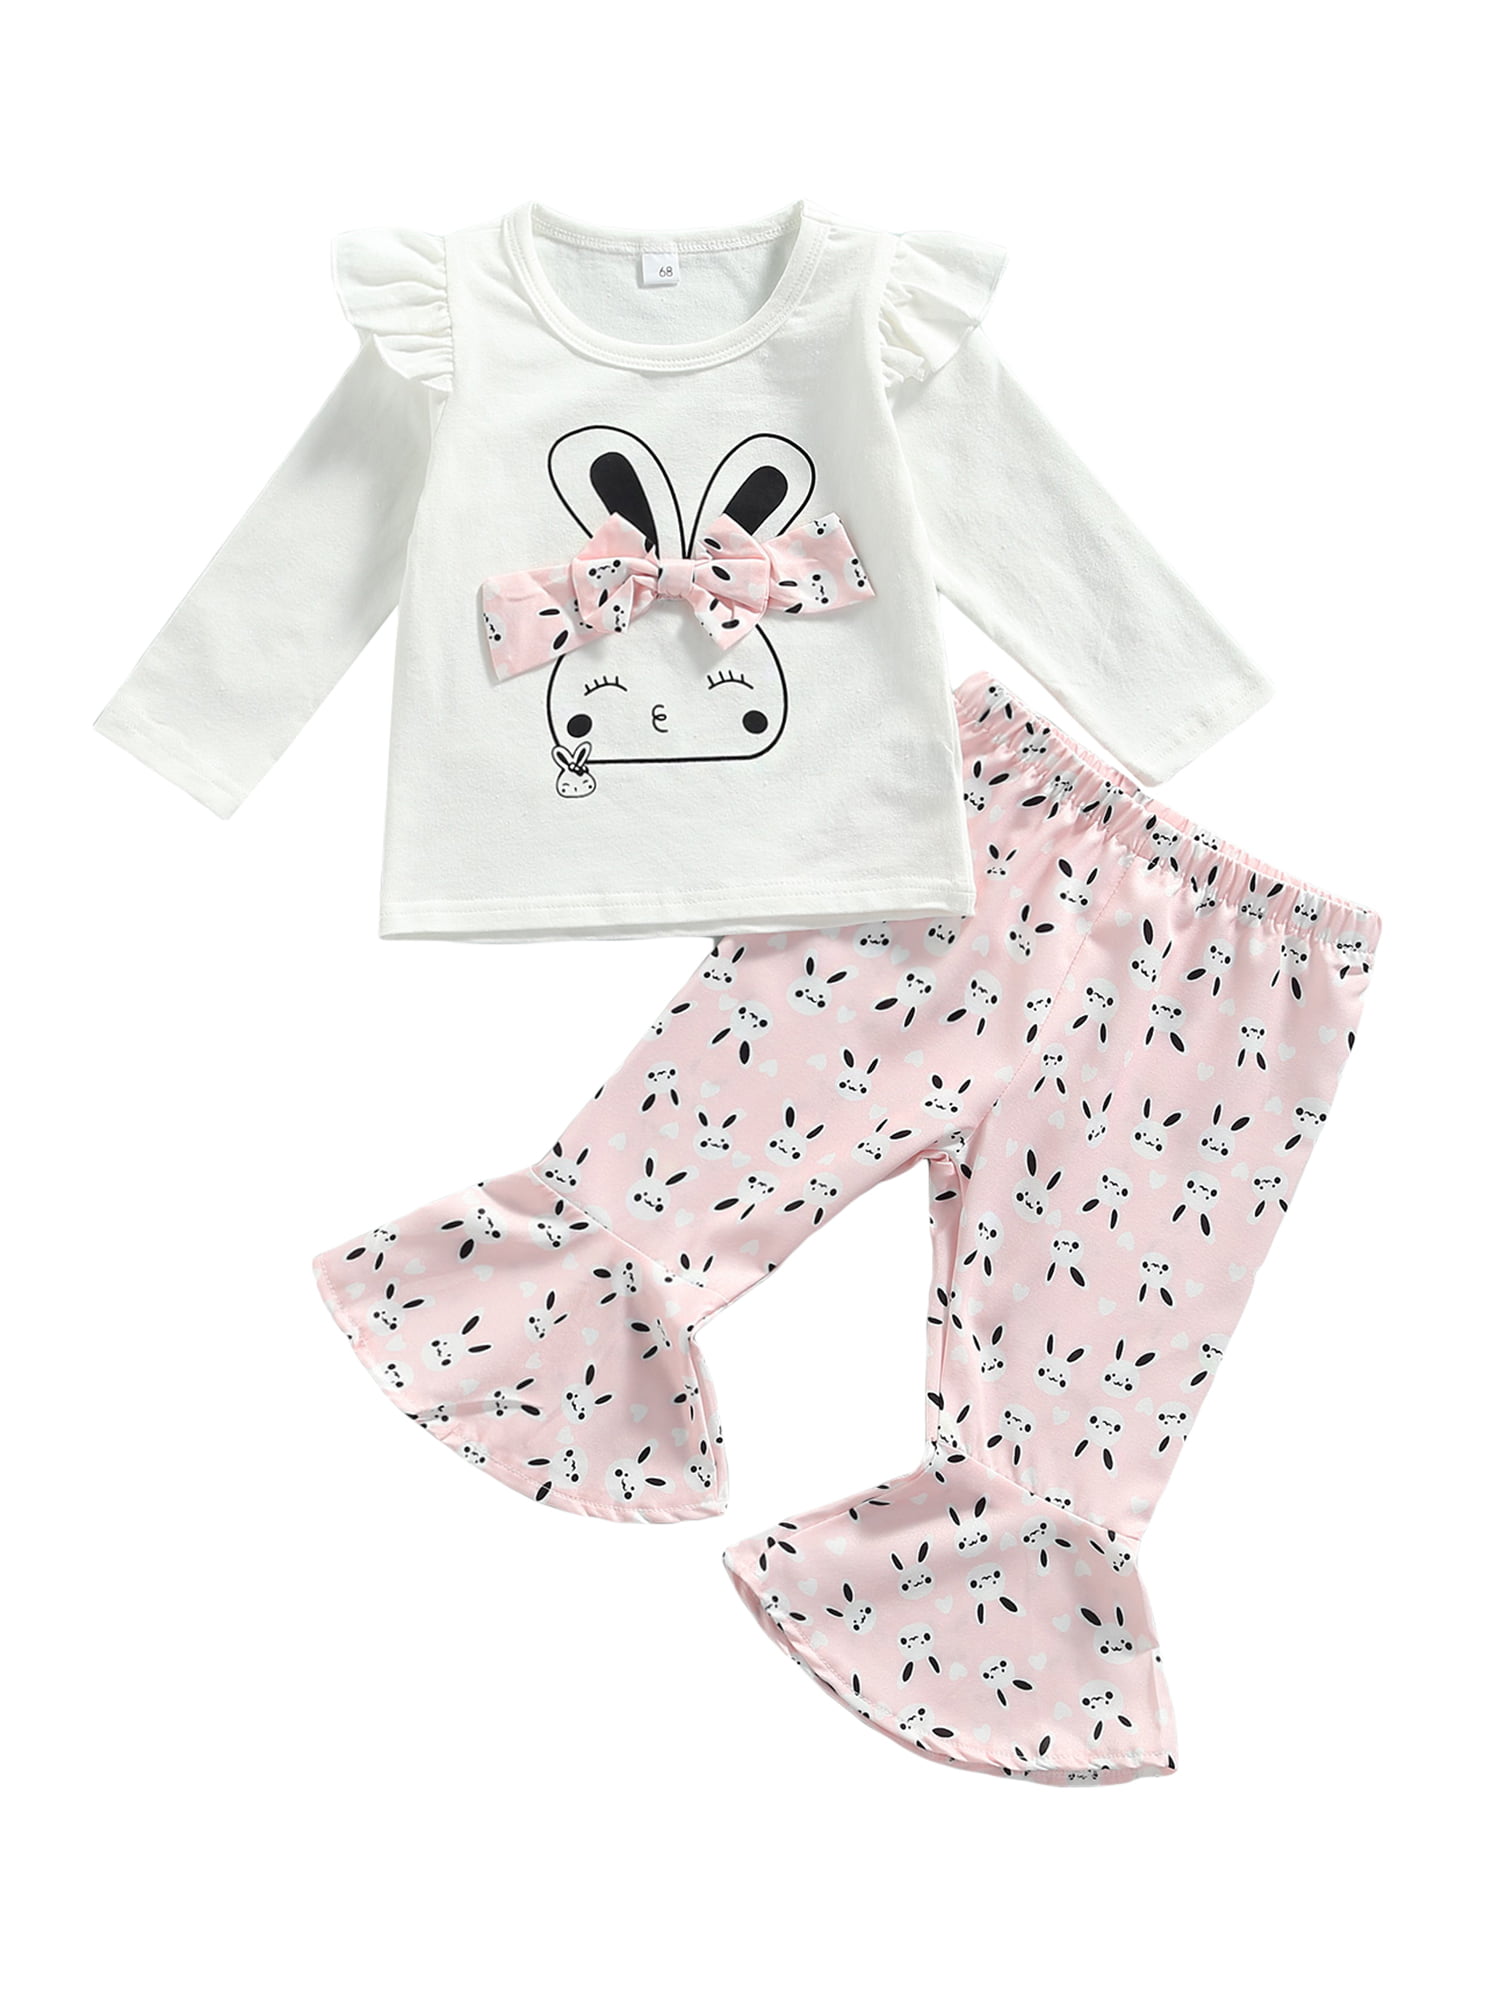 Baby Girl Easter Rabbit Outfits Clothes Set Newborn Rabbit Printing Long-Sleeved Top and Pants Headband 3Piece Suit